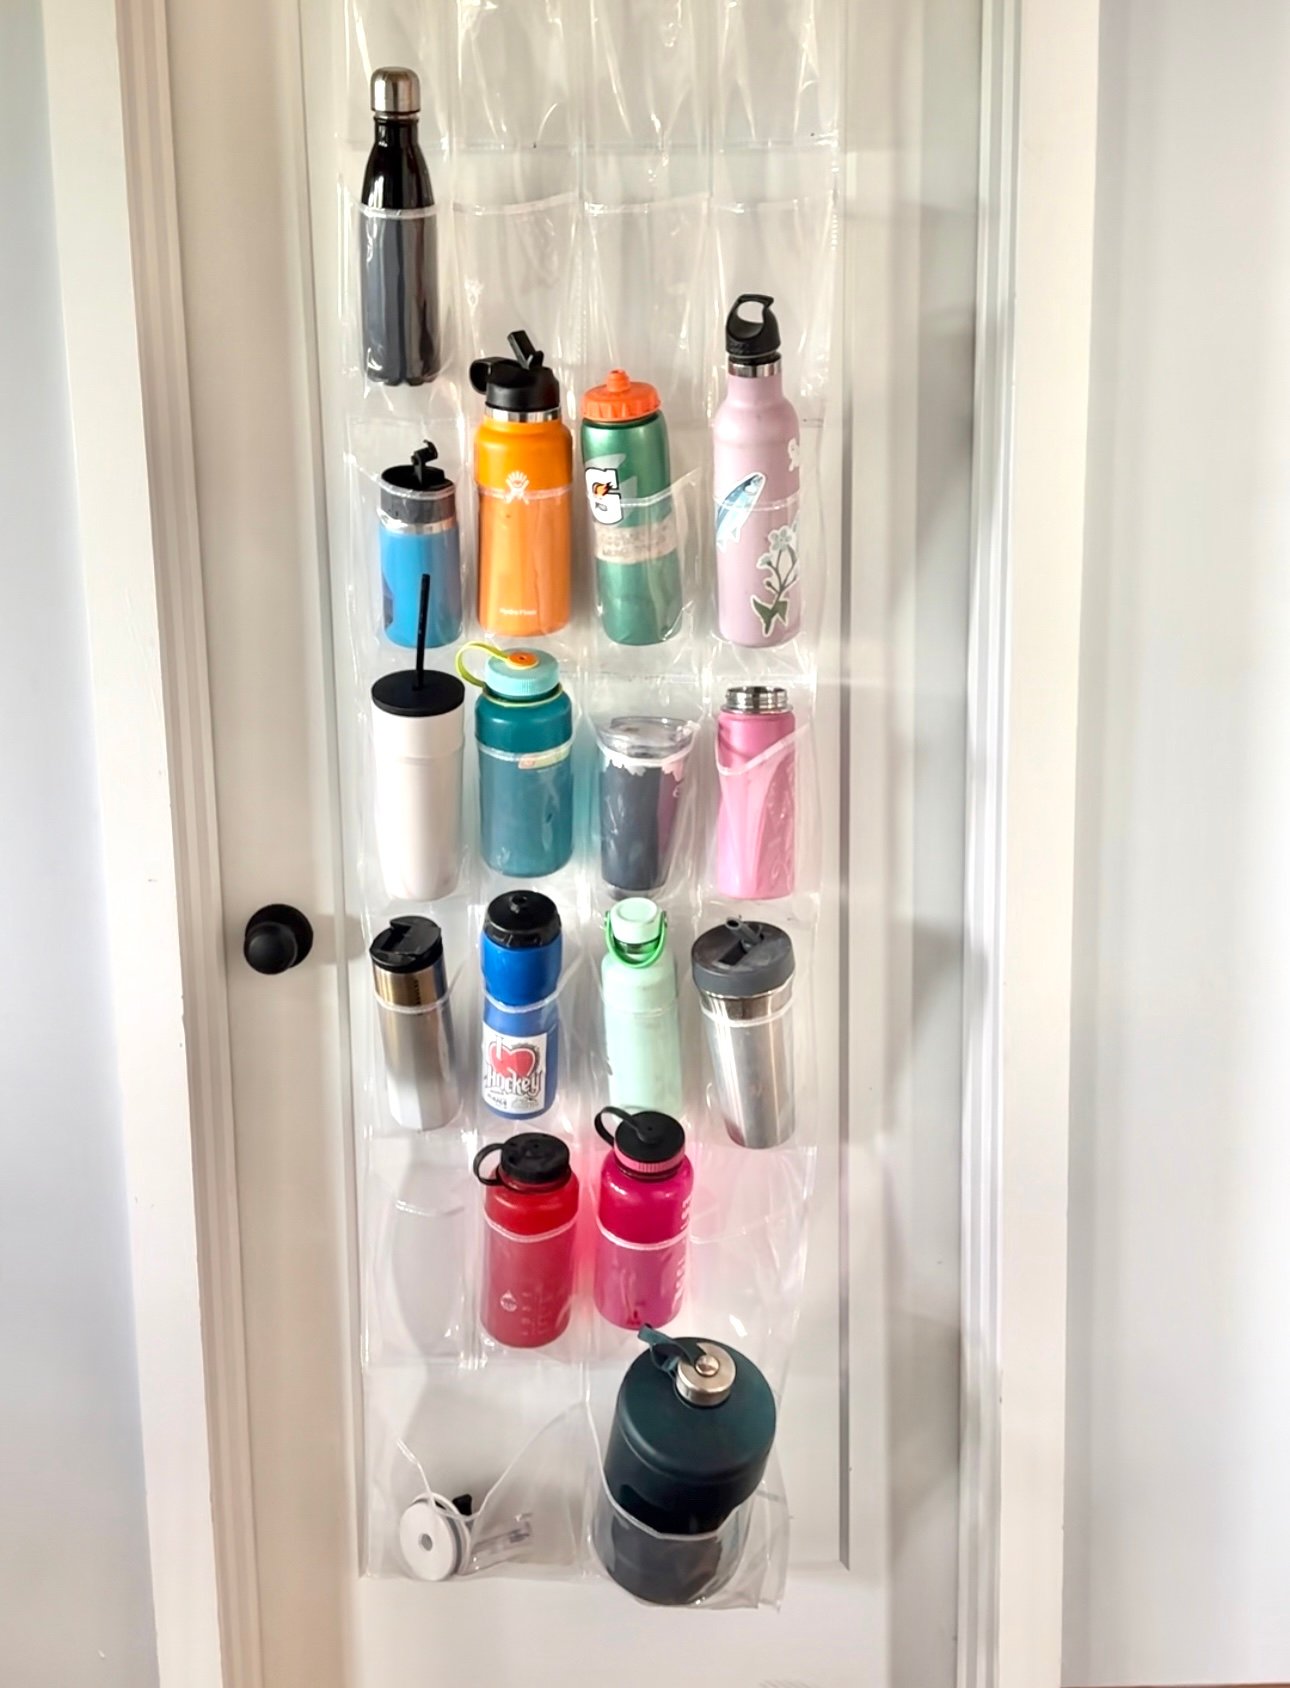 10 Water Bottle Storage Ideas from a Professional Organizer